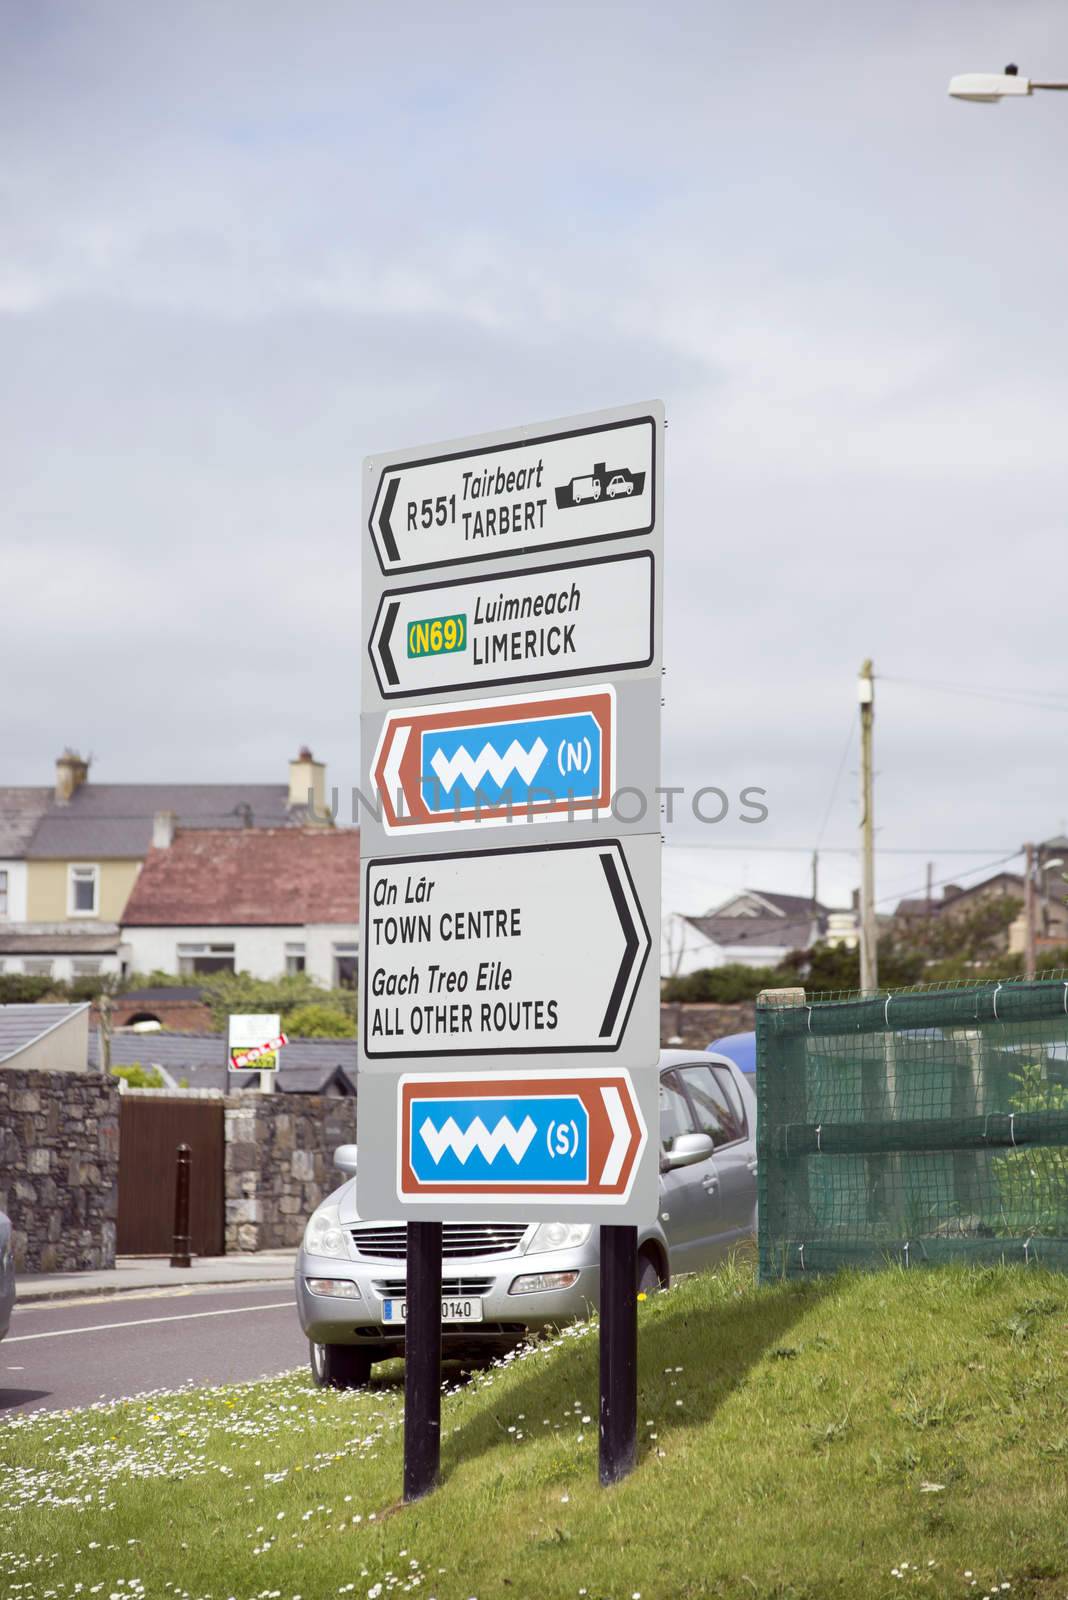 irish road signs in kerry by morrbyte